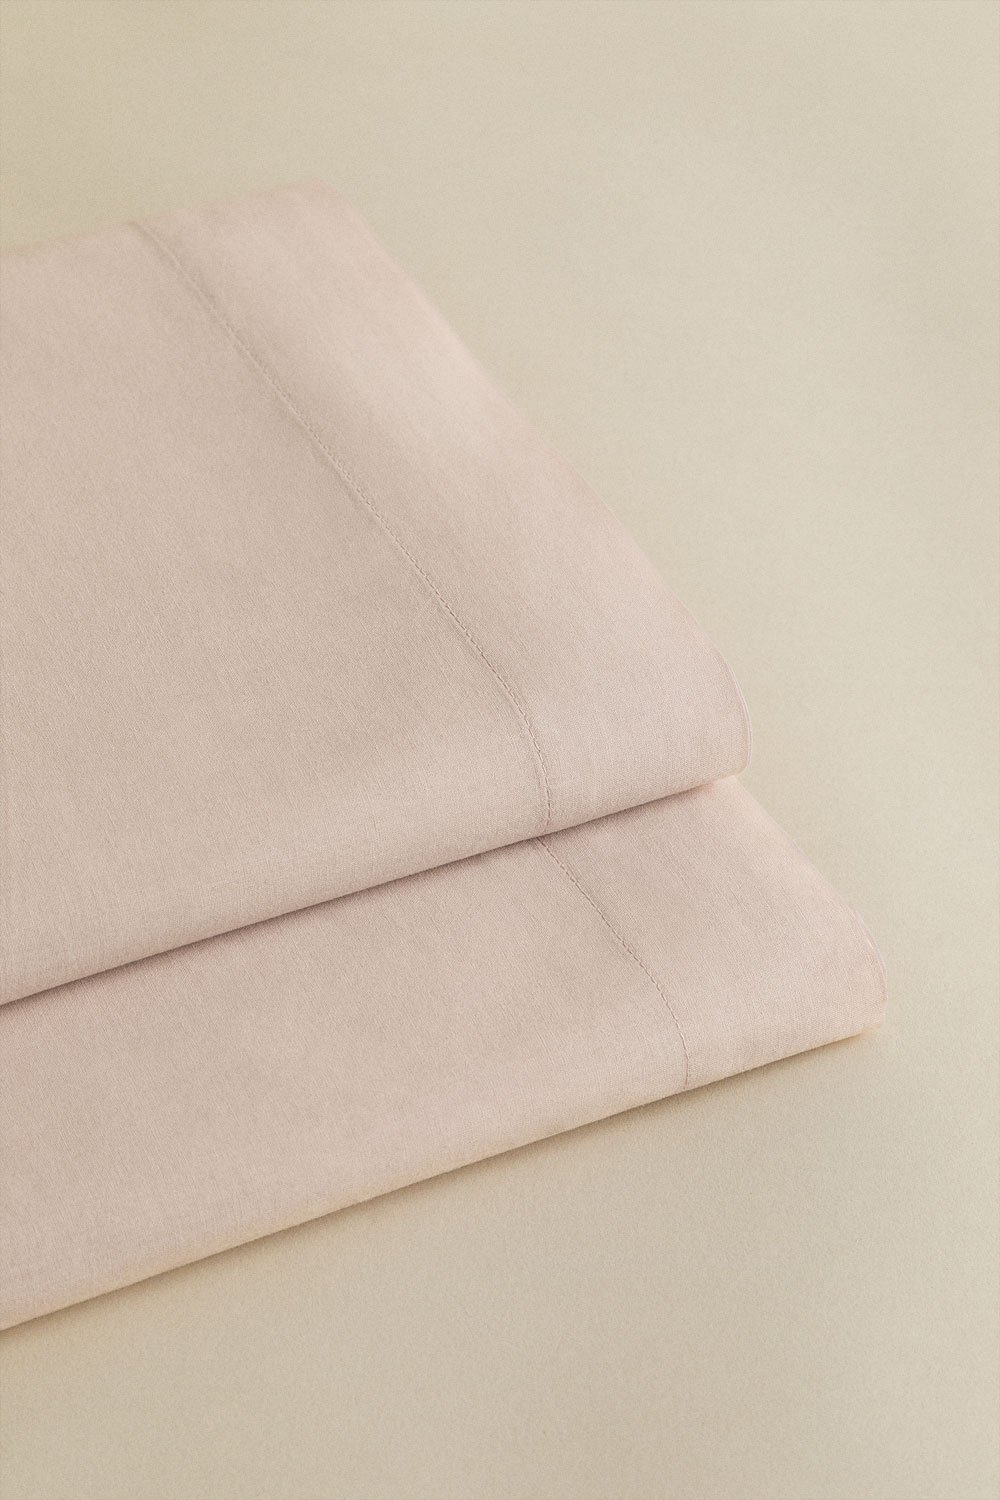 Lesia 180 Thread Count Percale Cotton Flat Sheet, gallery image 1